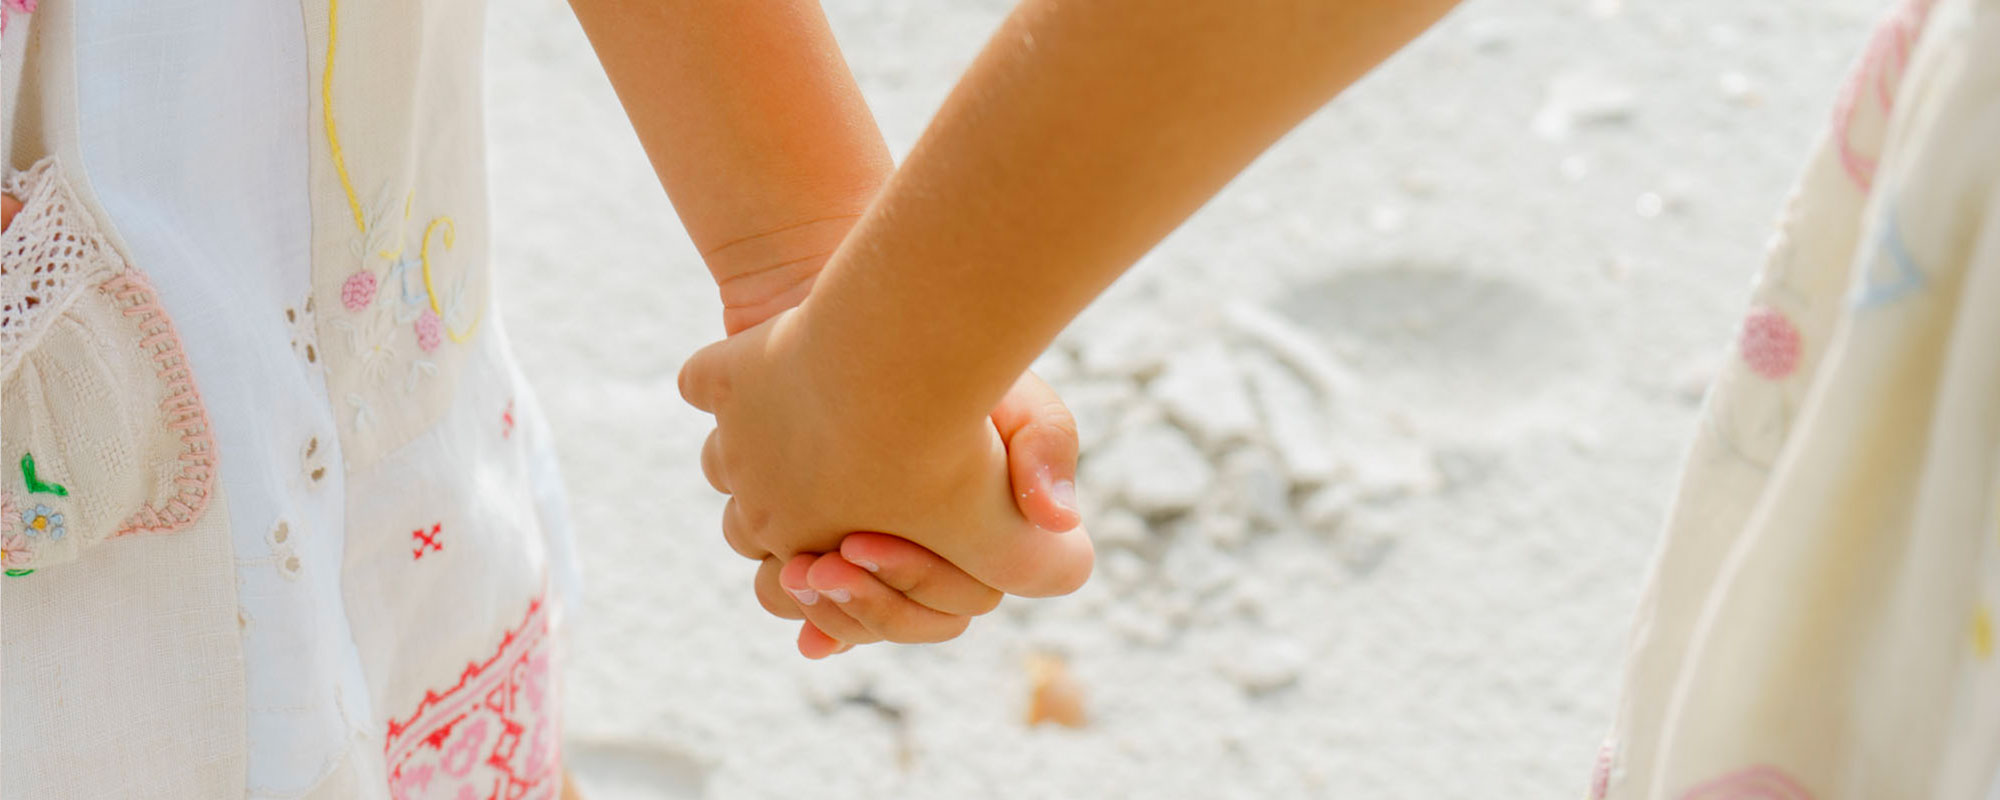 girls holding hands at the beach | JanDesai.com